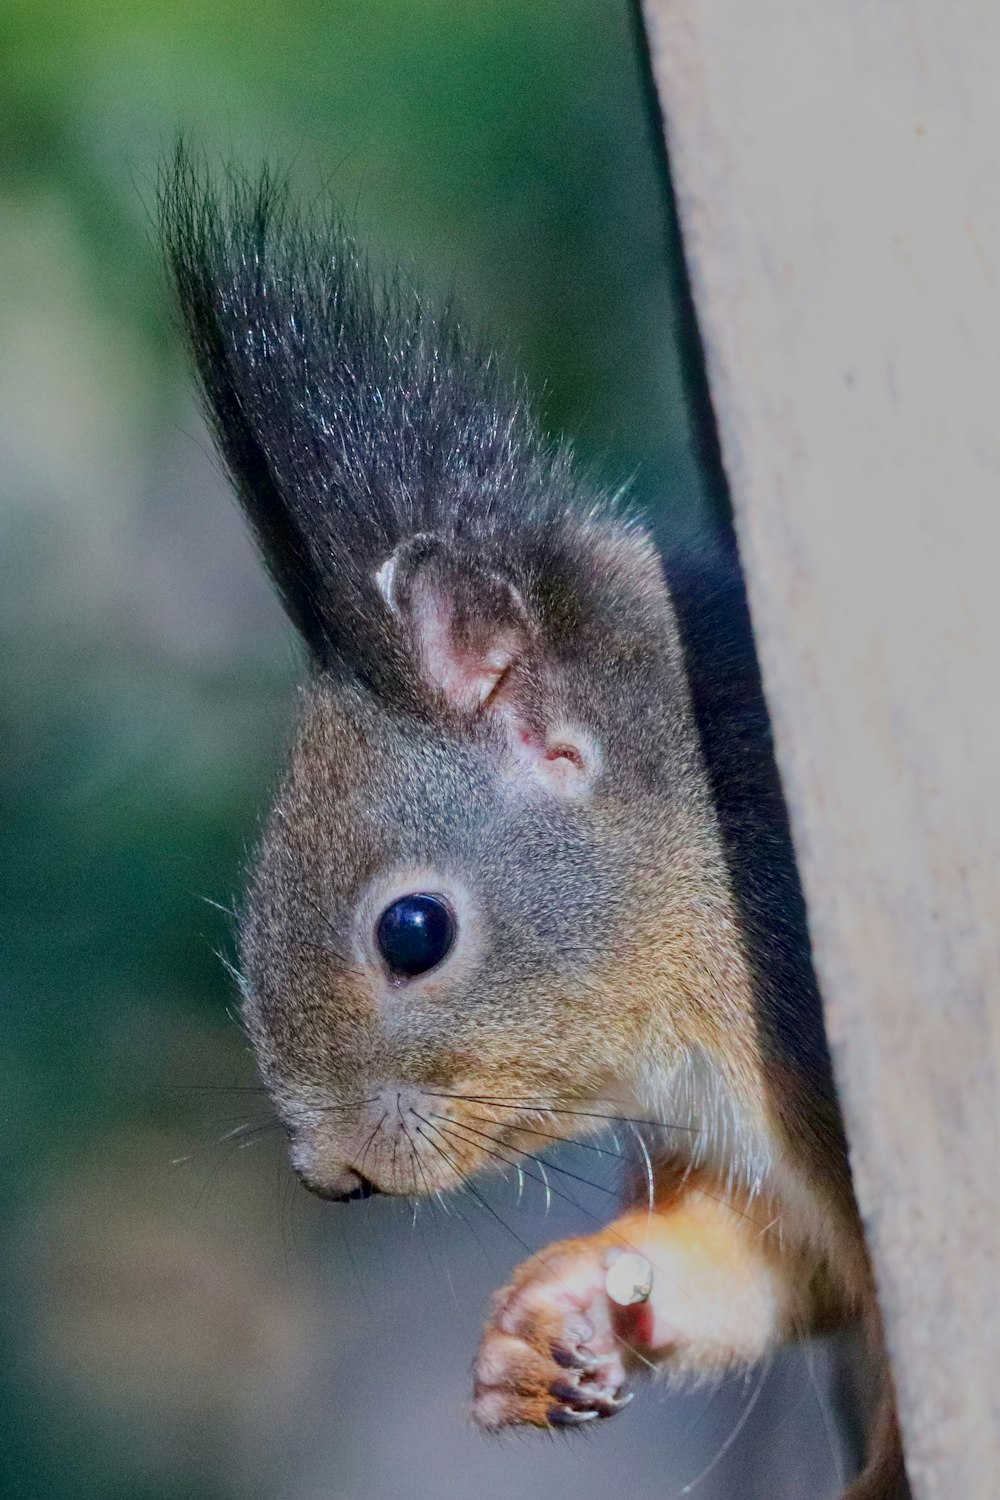 a close up of a squirrel peeking out of a hole